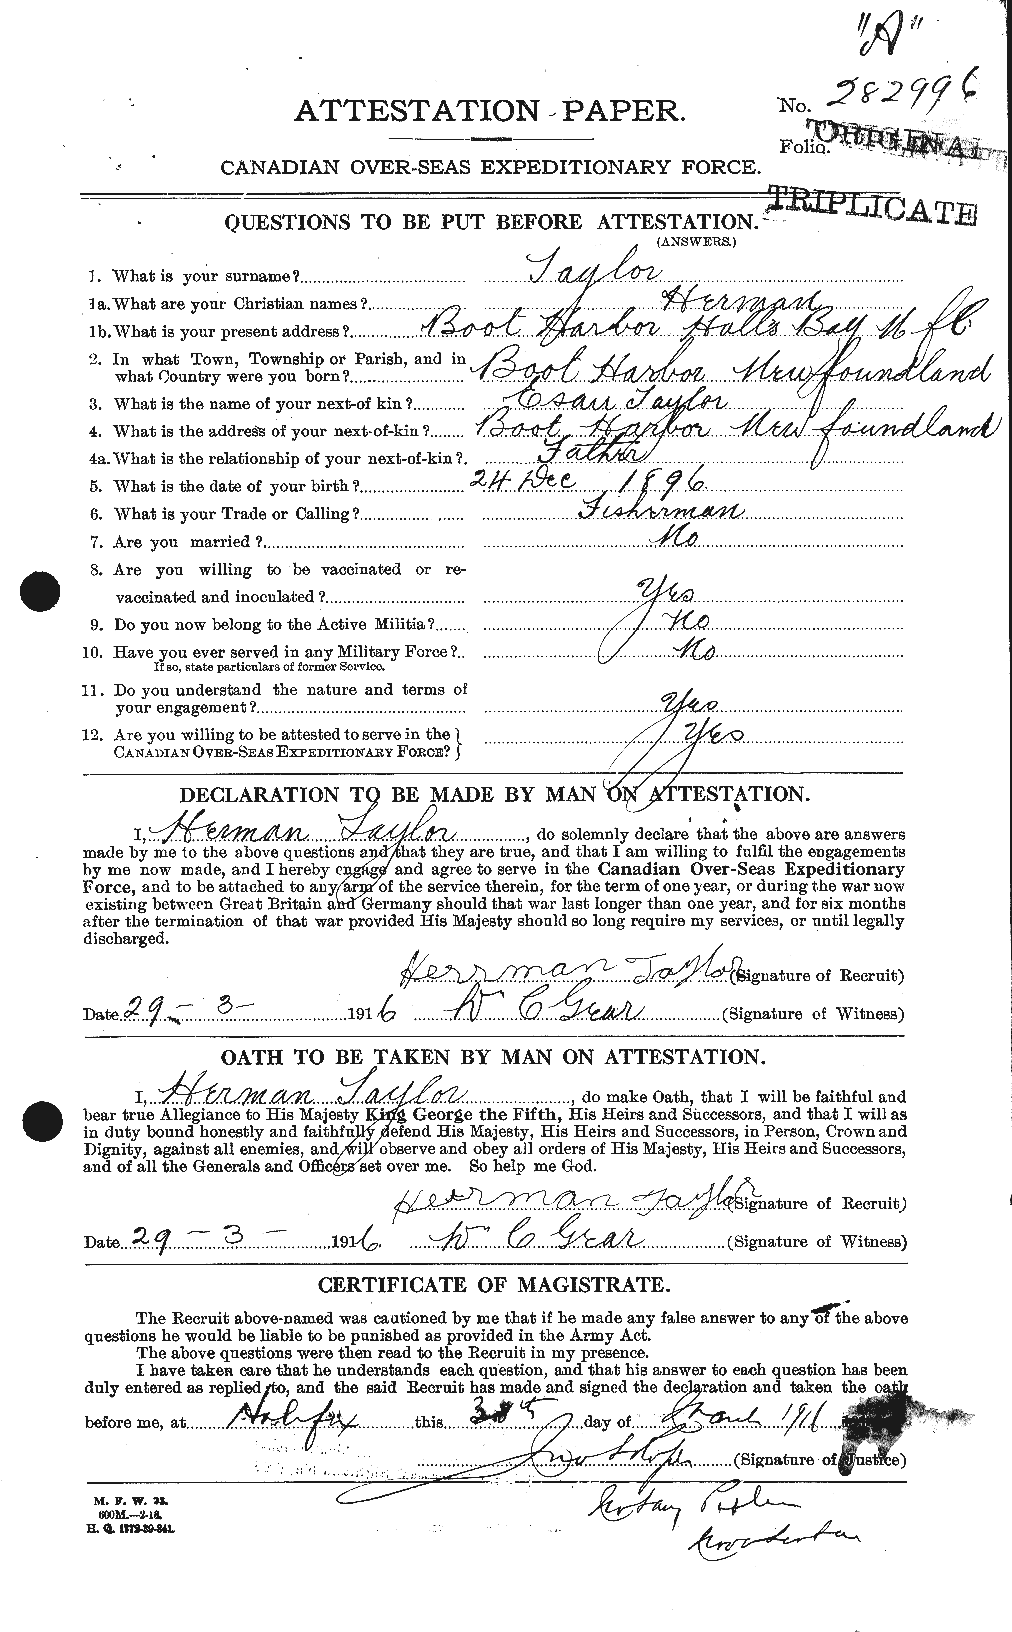 Personnel Records of the First World War - CEF 626582a